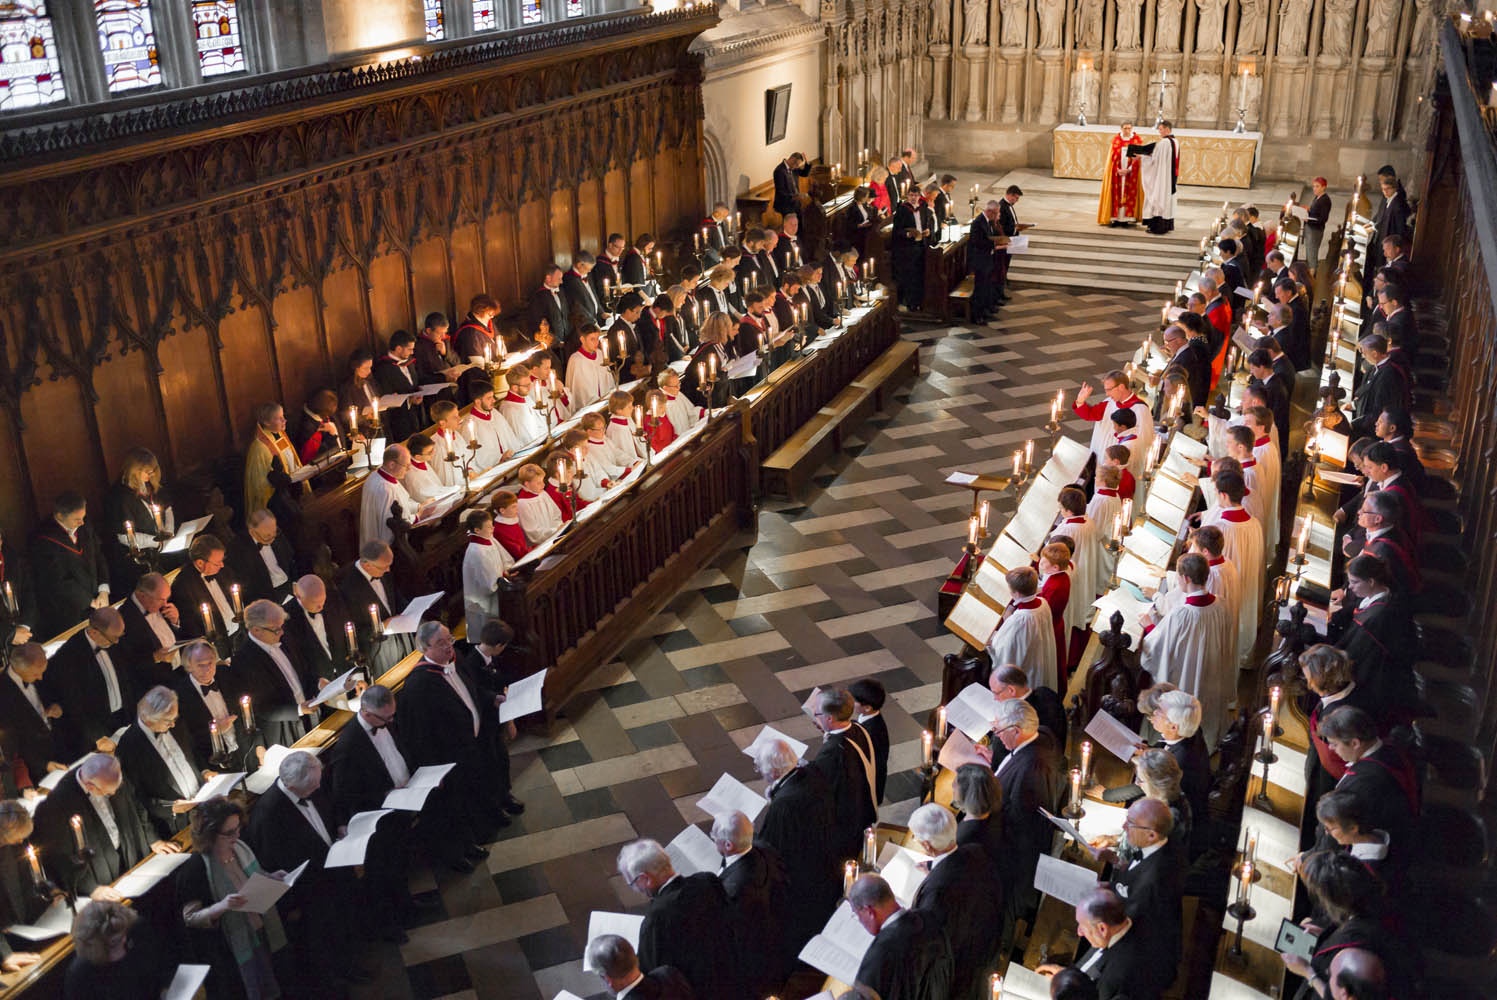 Carol Service in the New College Chapel